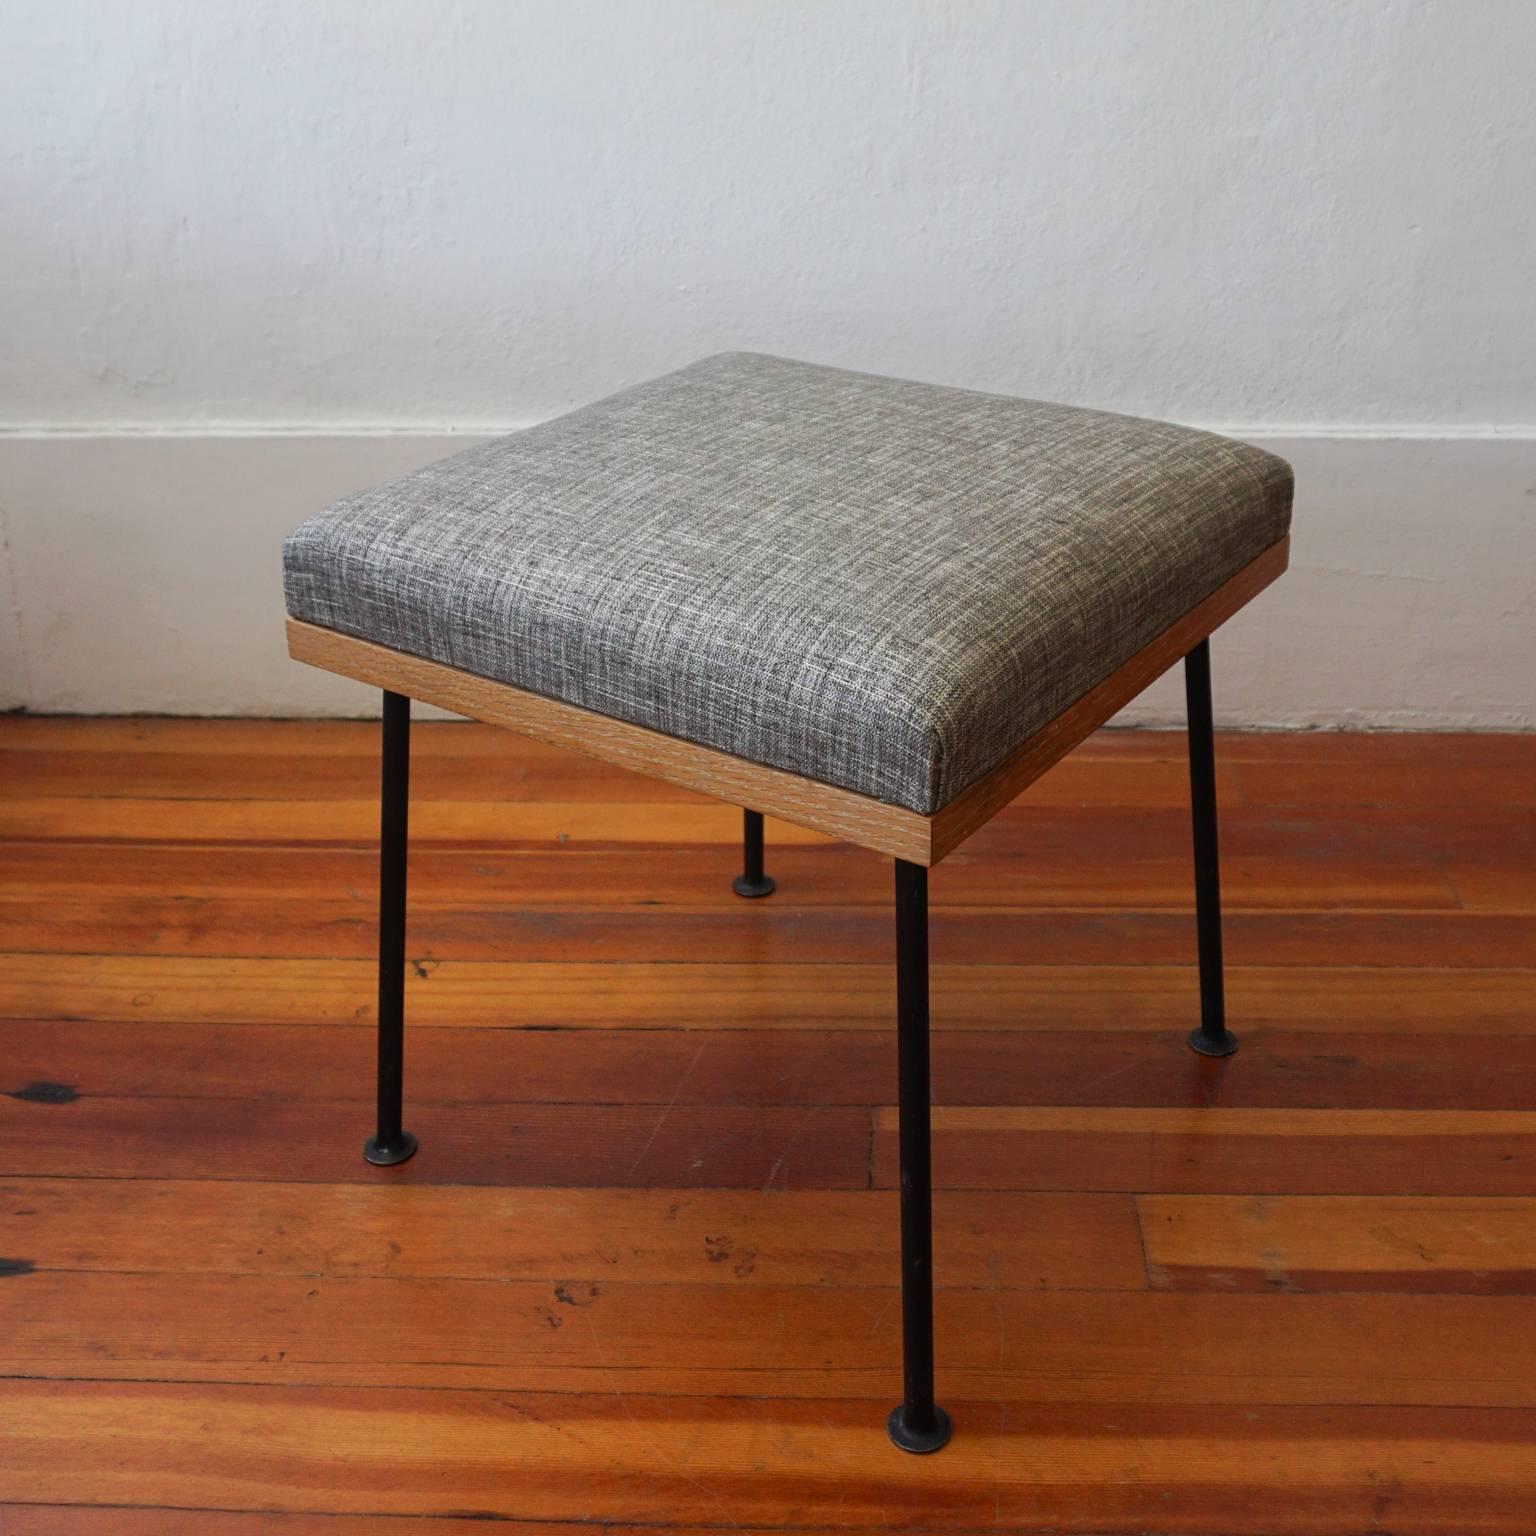 Stool or ottoman by Raymond Loewy for Mengel Furniture Company. Solid iron legs with limed wood frame, 1950s.